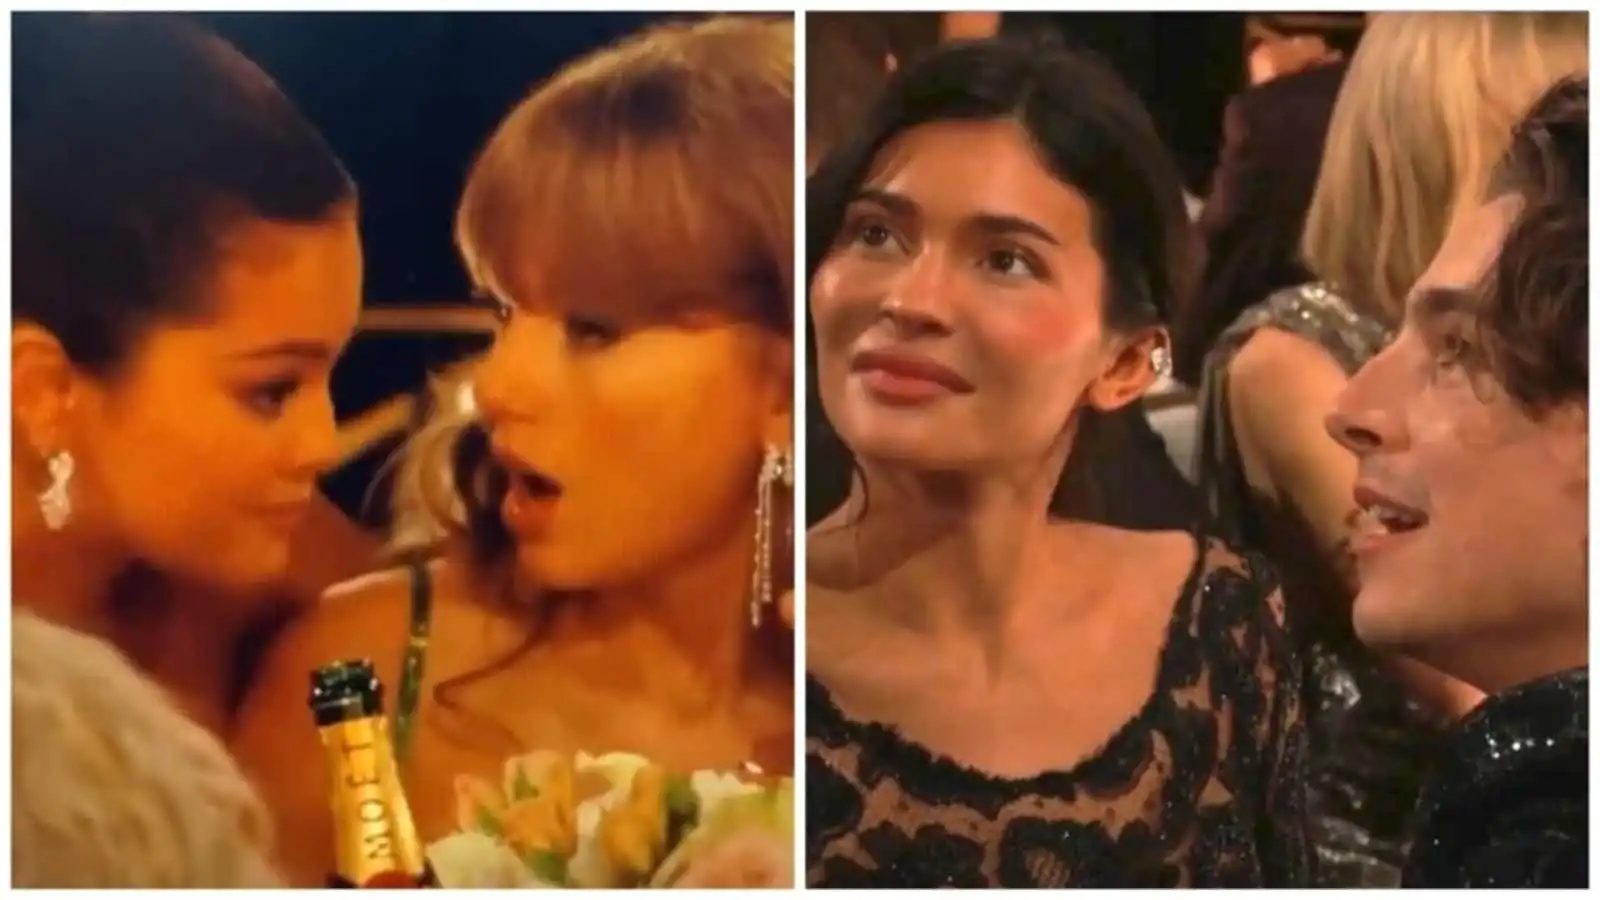 Selena Gomez Golden Globes 2024: No Gossip about Timothée Chalamet or Kylie Jenner with BFF Taylor Swift, Report Claims